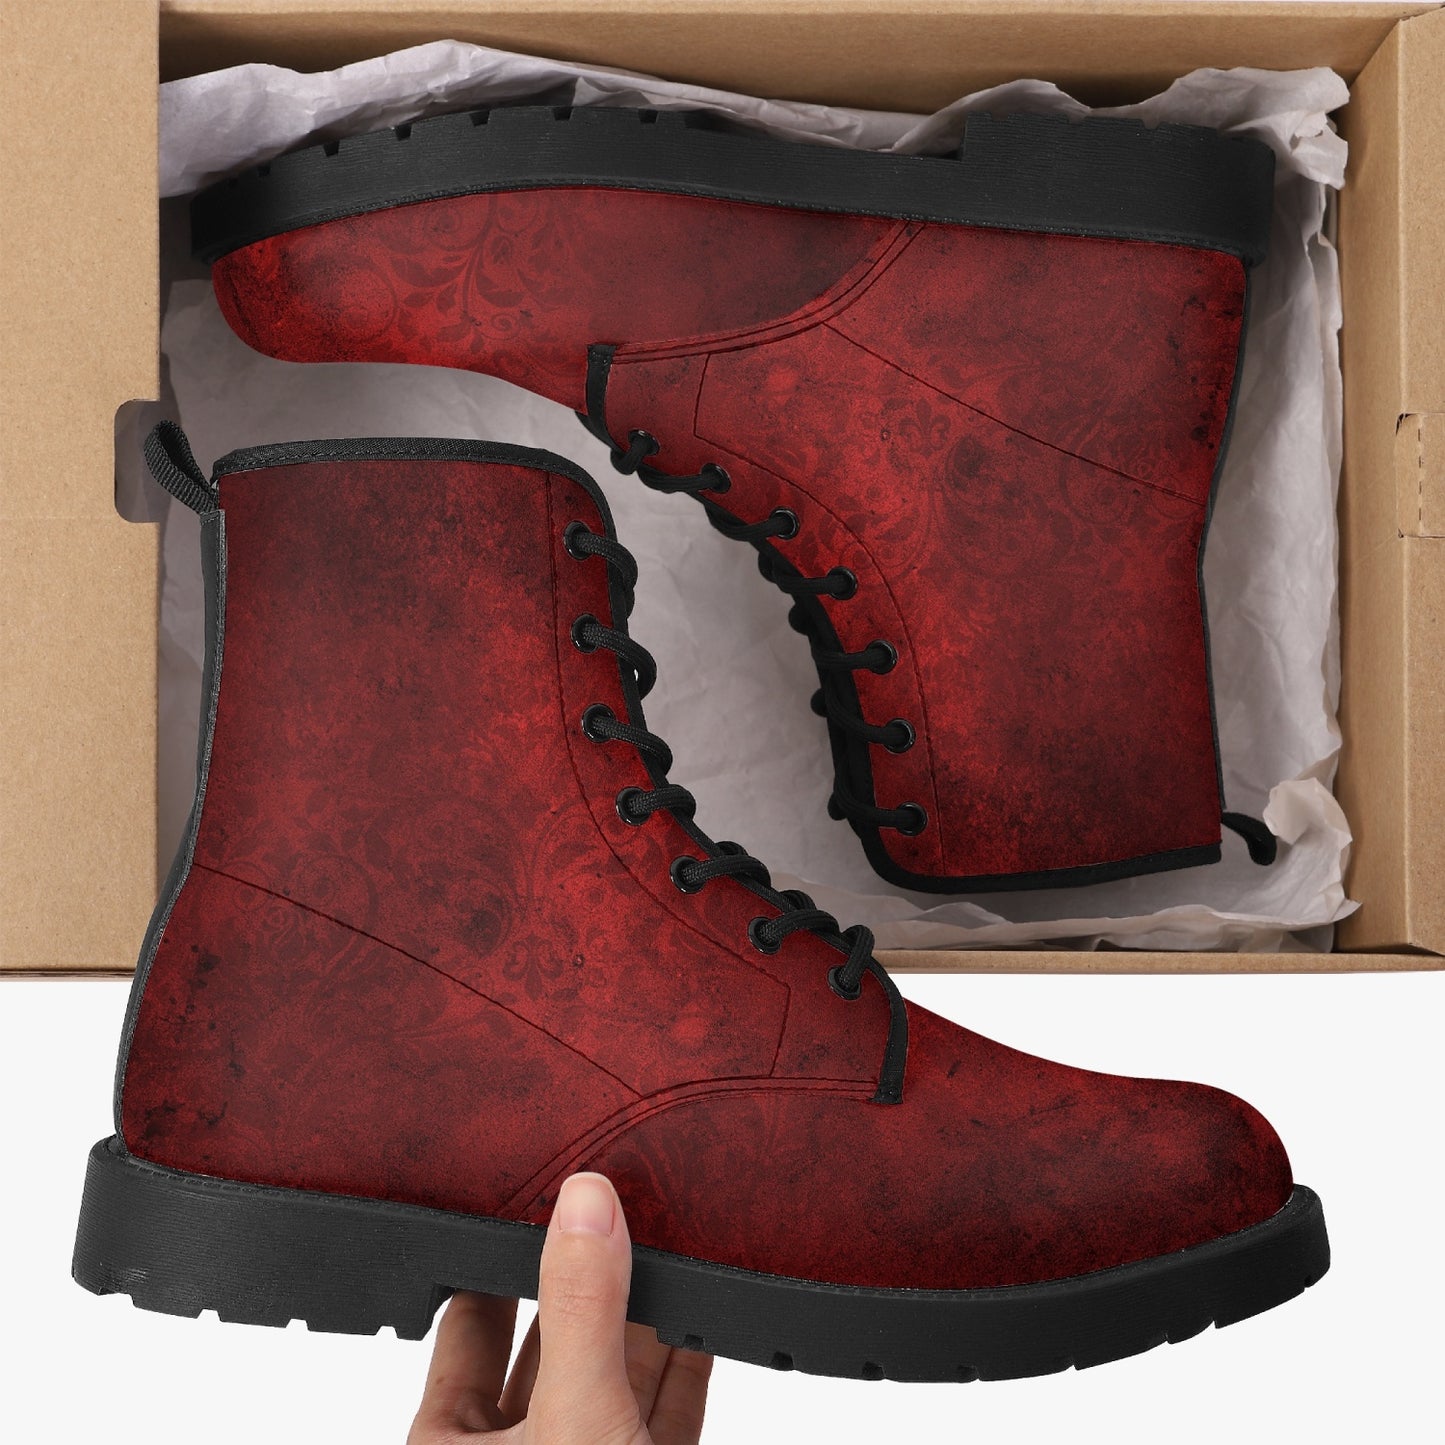 Red Gothic Grunge Vegan leather Combat Boots - Vegan Leather Red Goth Boots (JPREG95)